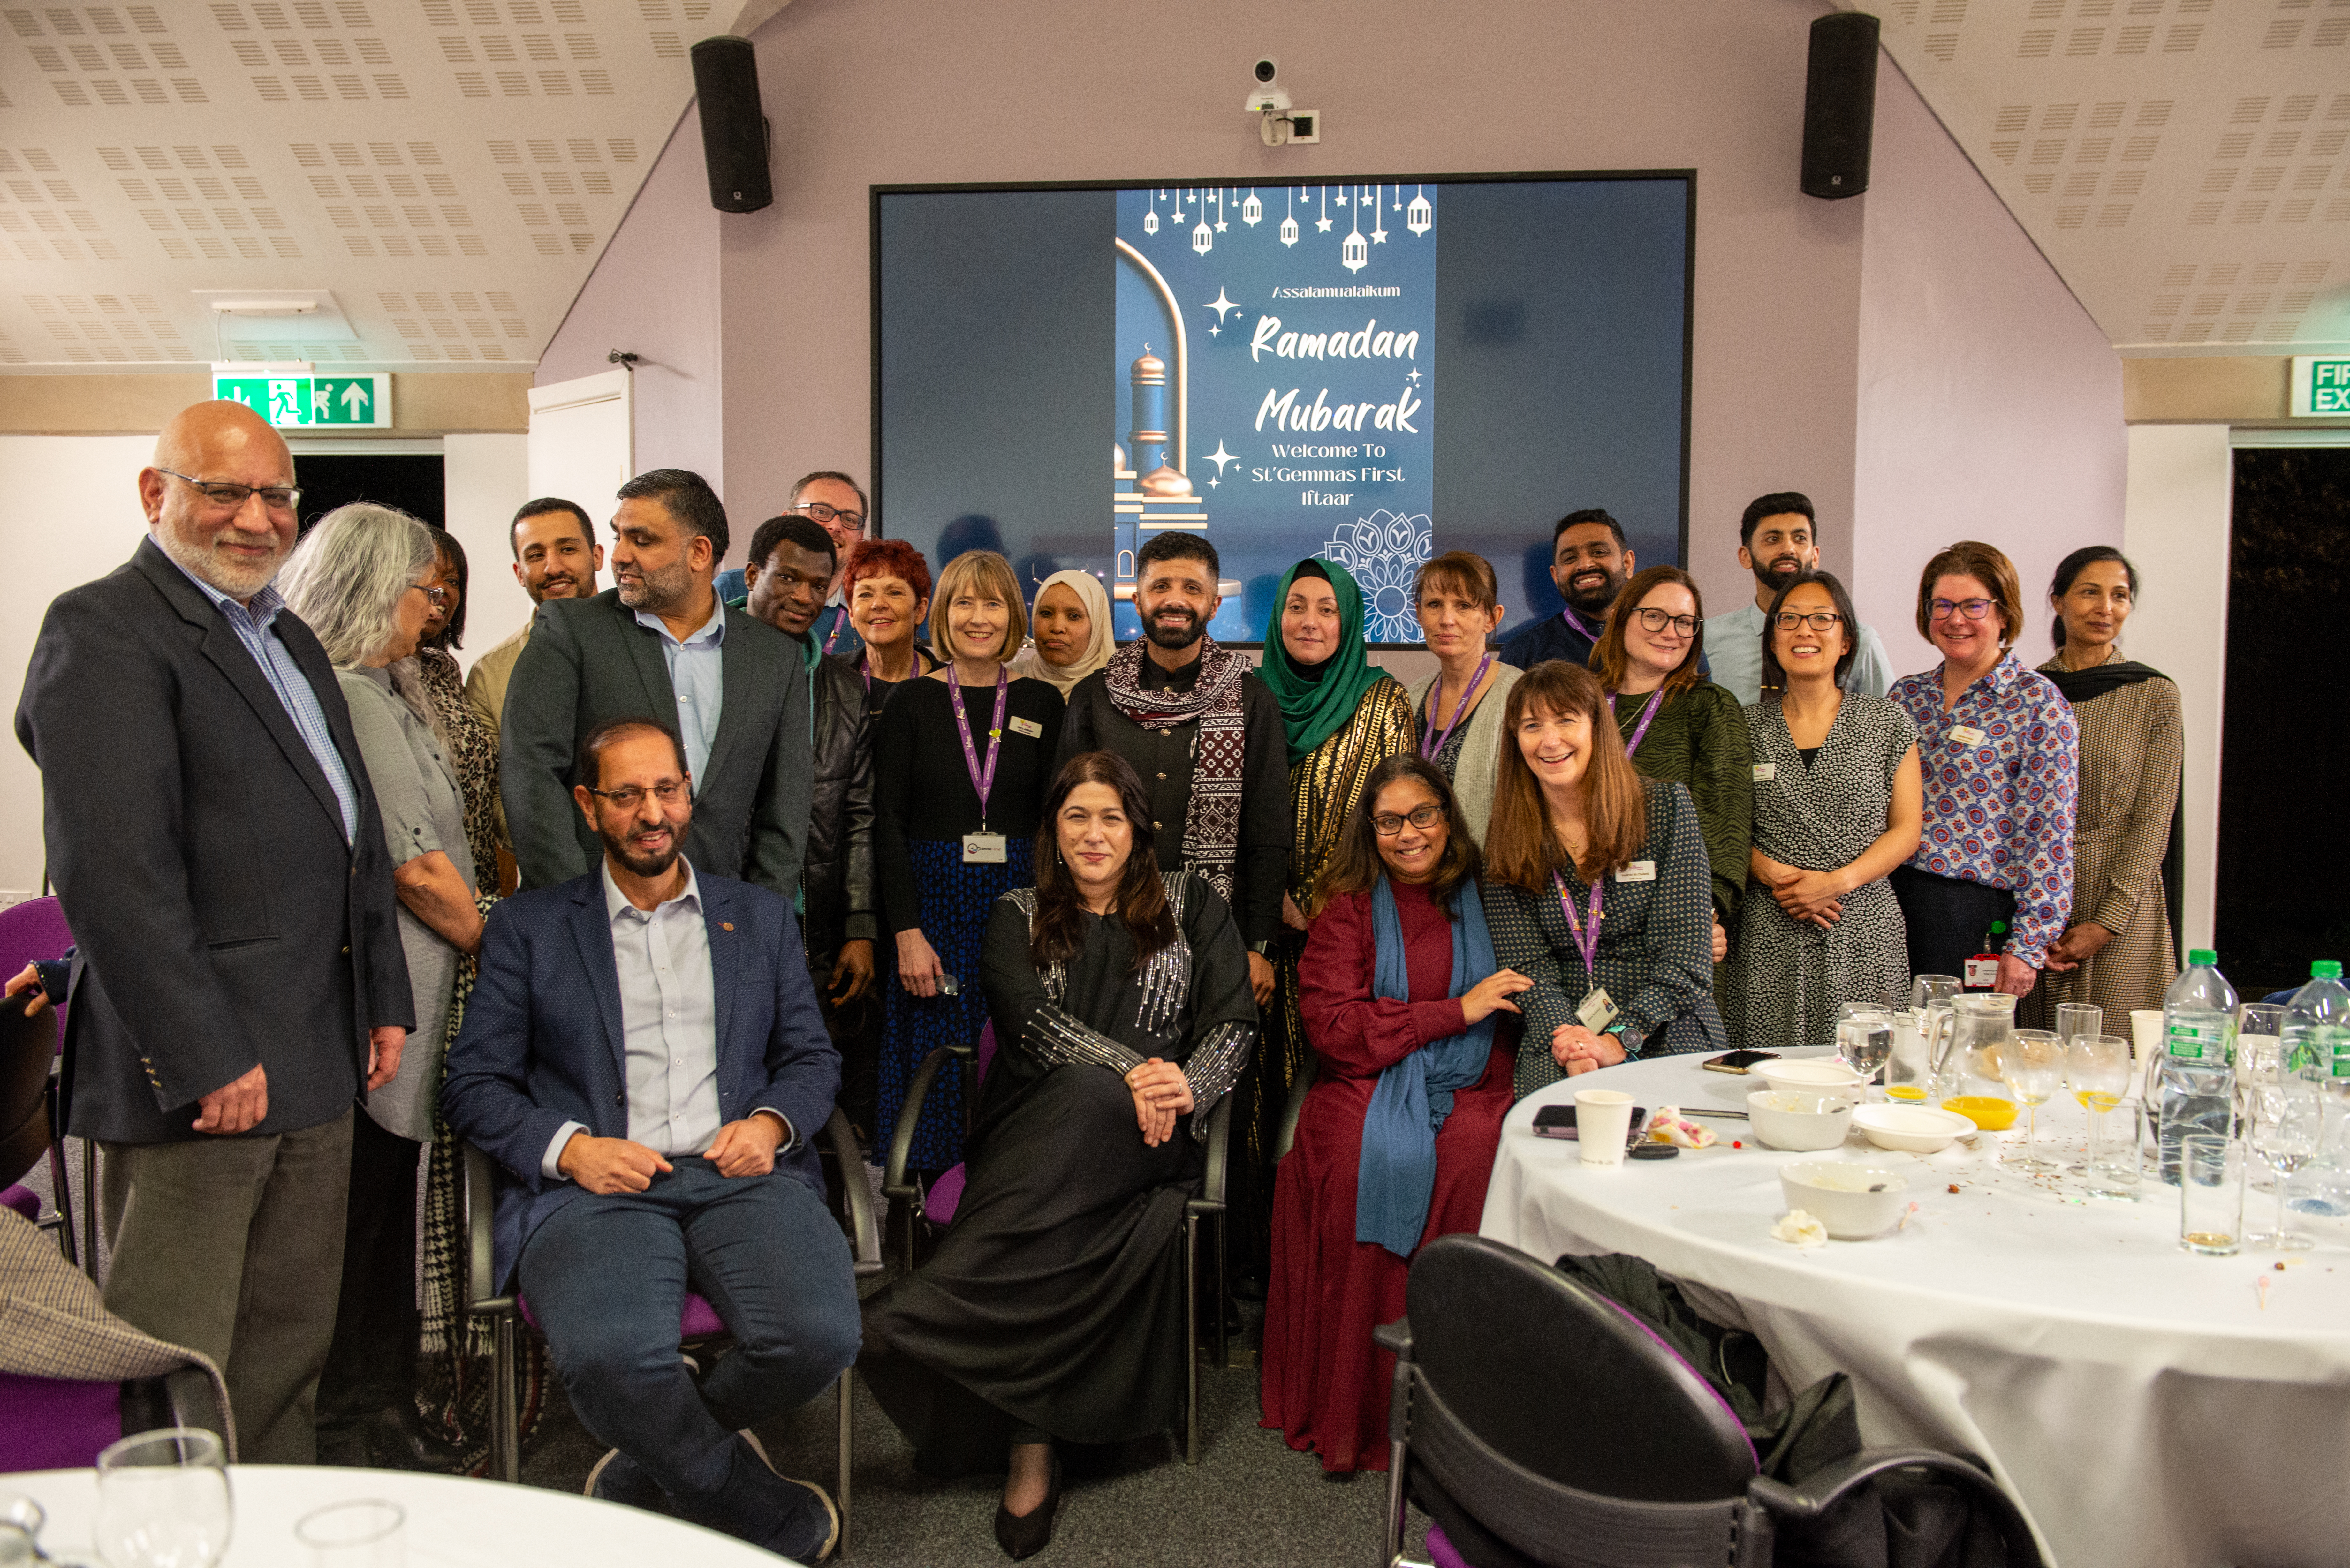 Bringing the community together at St Gemma’s first ever Iftar